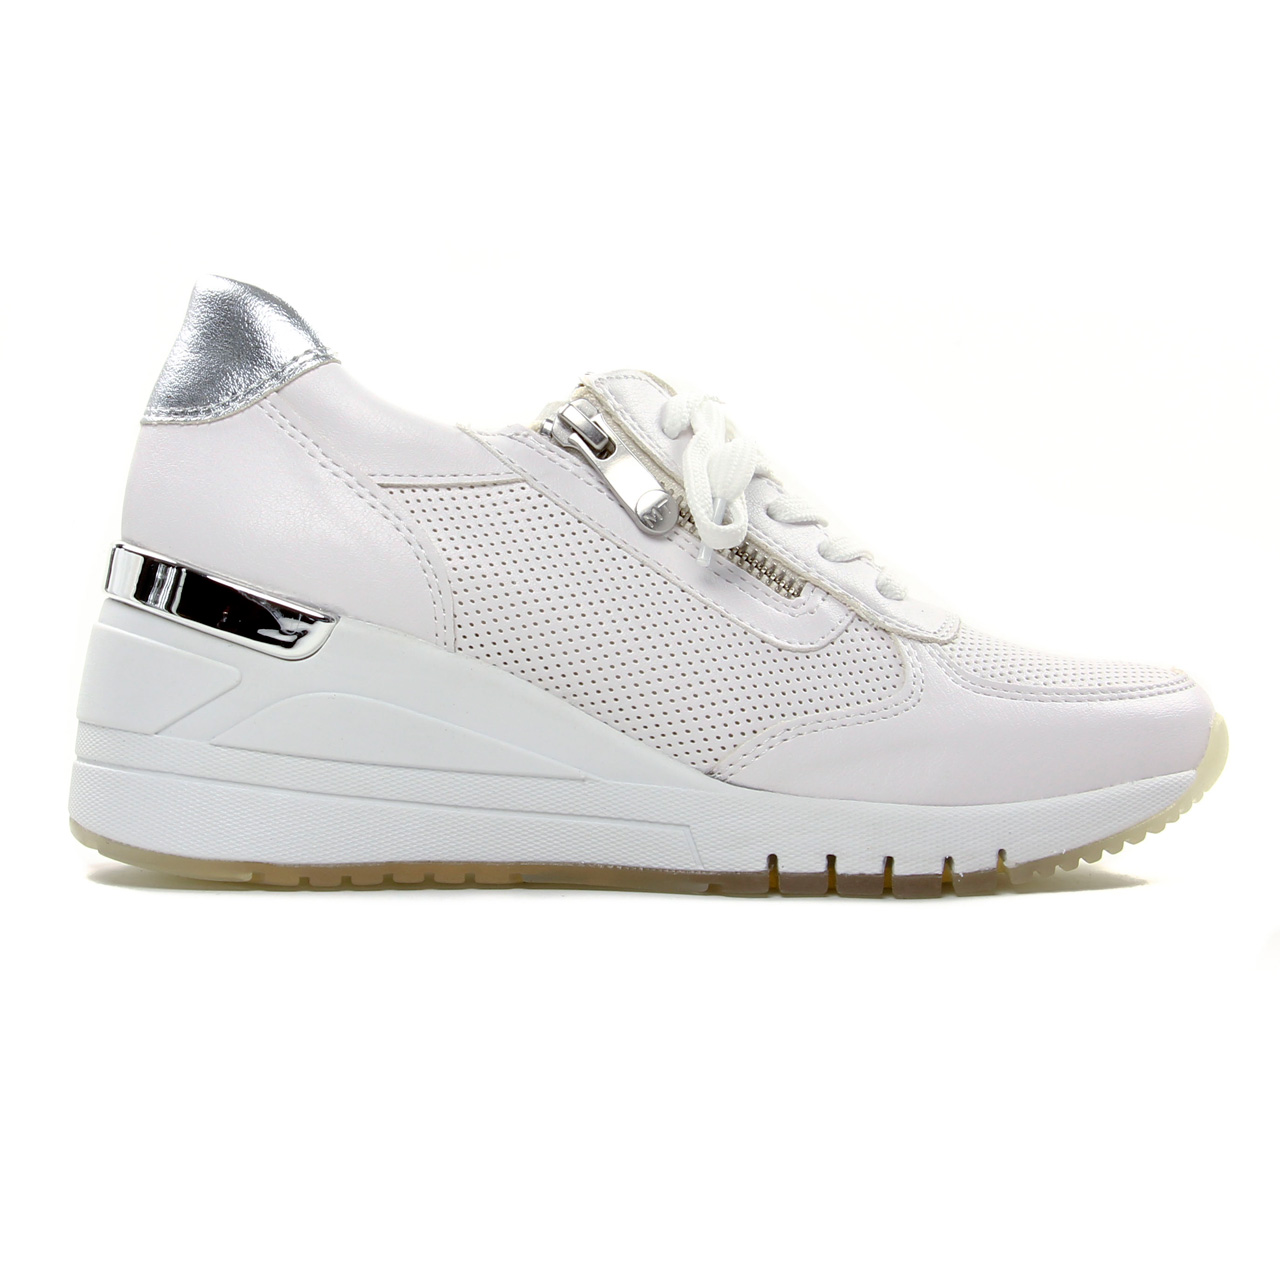 Achat chaussures Marco Tozzi Femme Basket, vente Marco Tozzi 2-23743-28  White Gold - Basket compensee Femme - Blanc Or